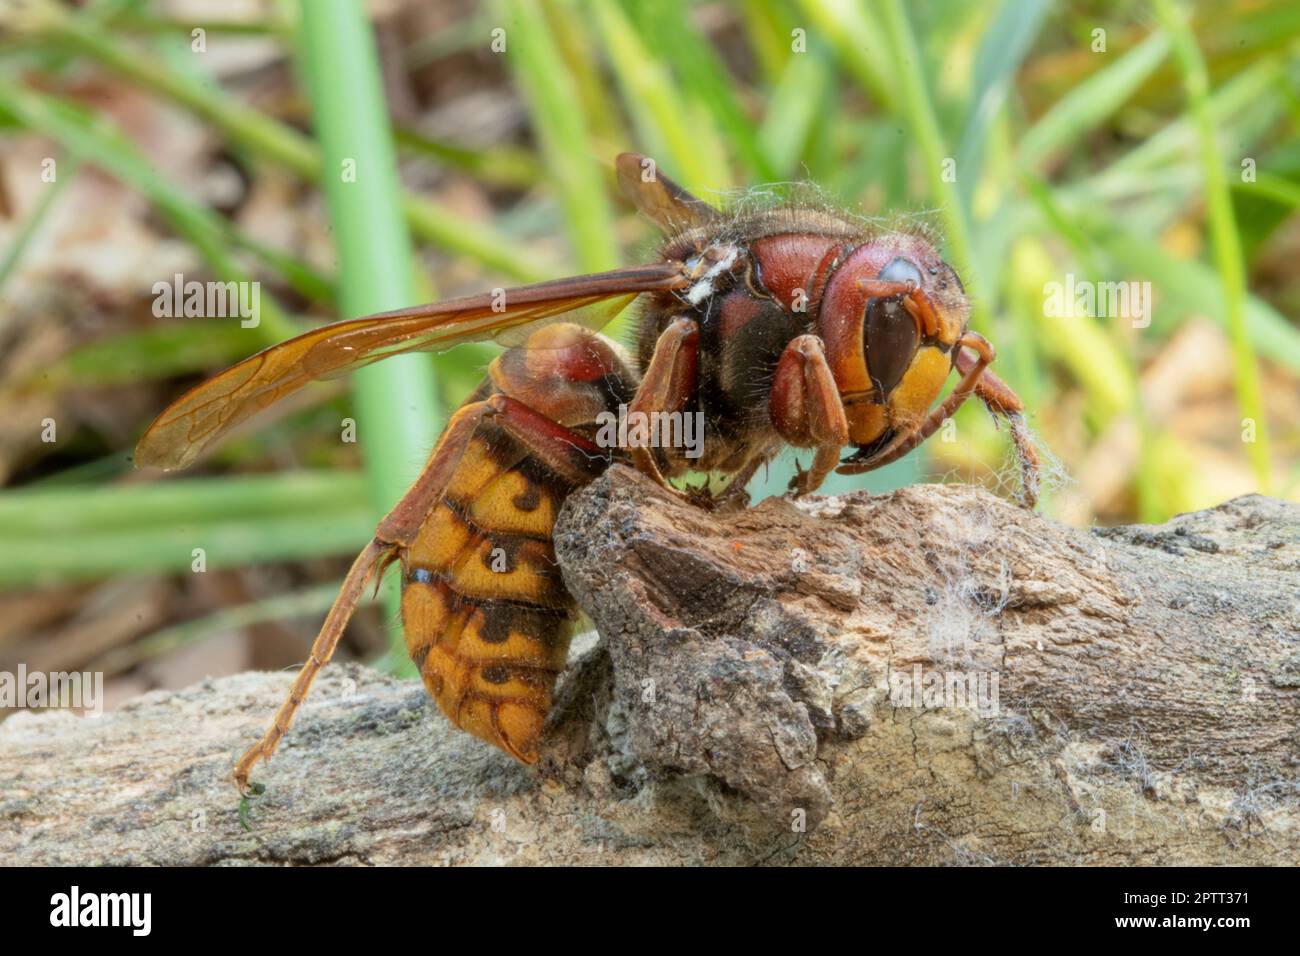 Giant hornet insect Stock Photo